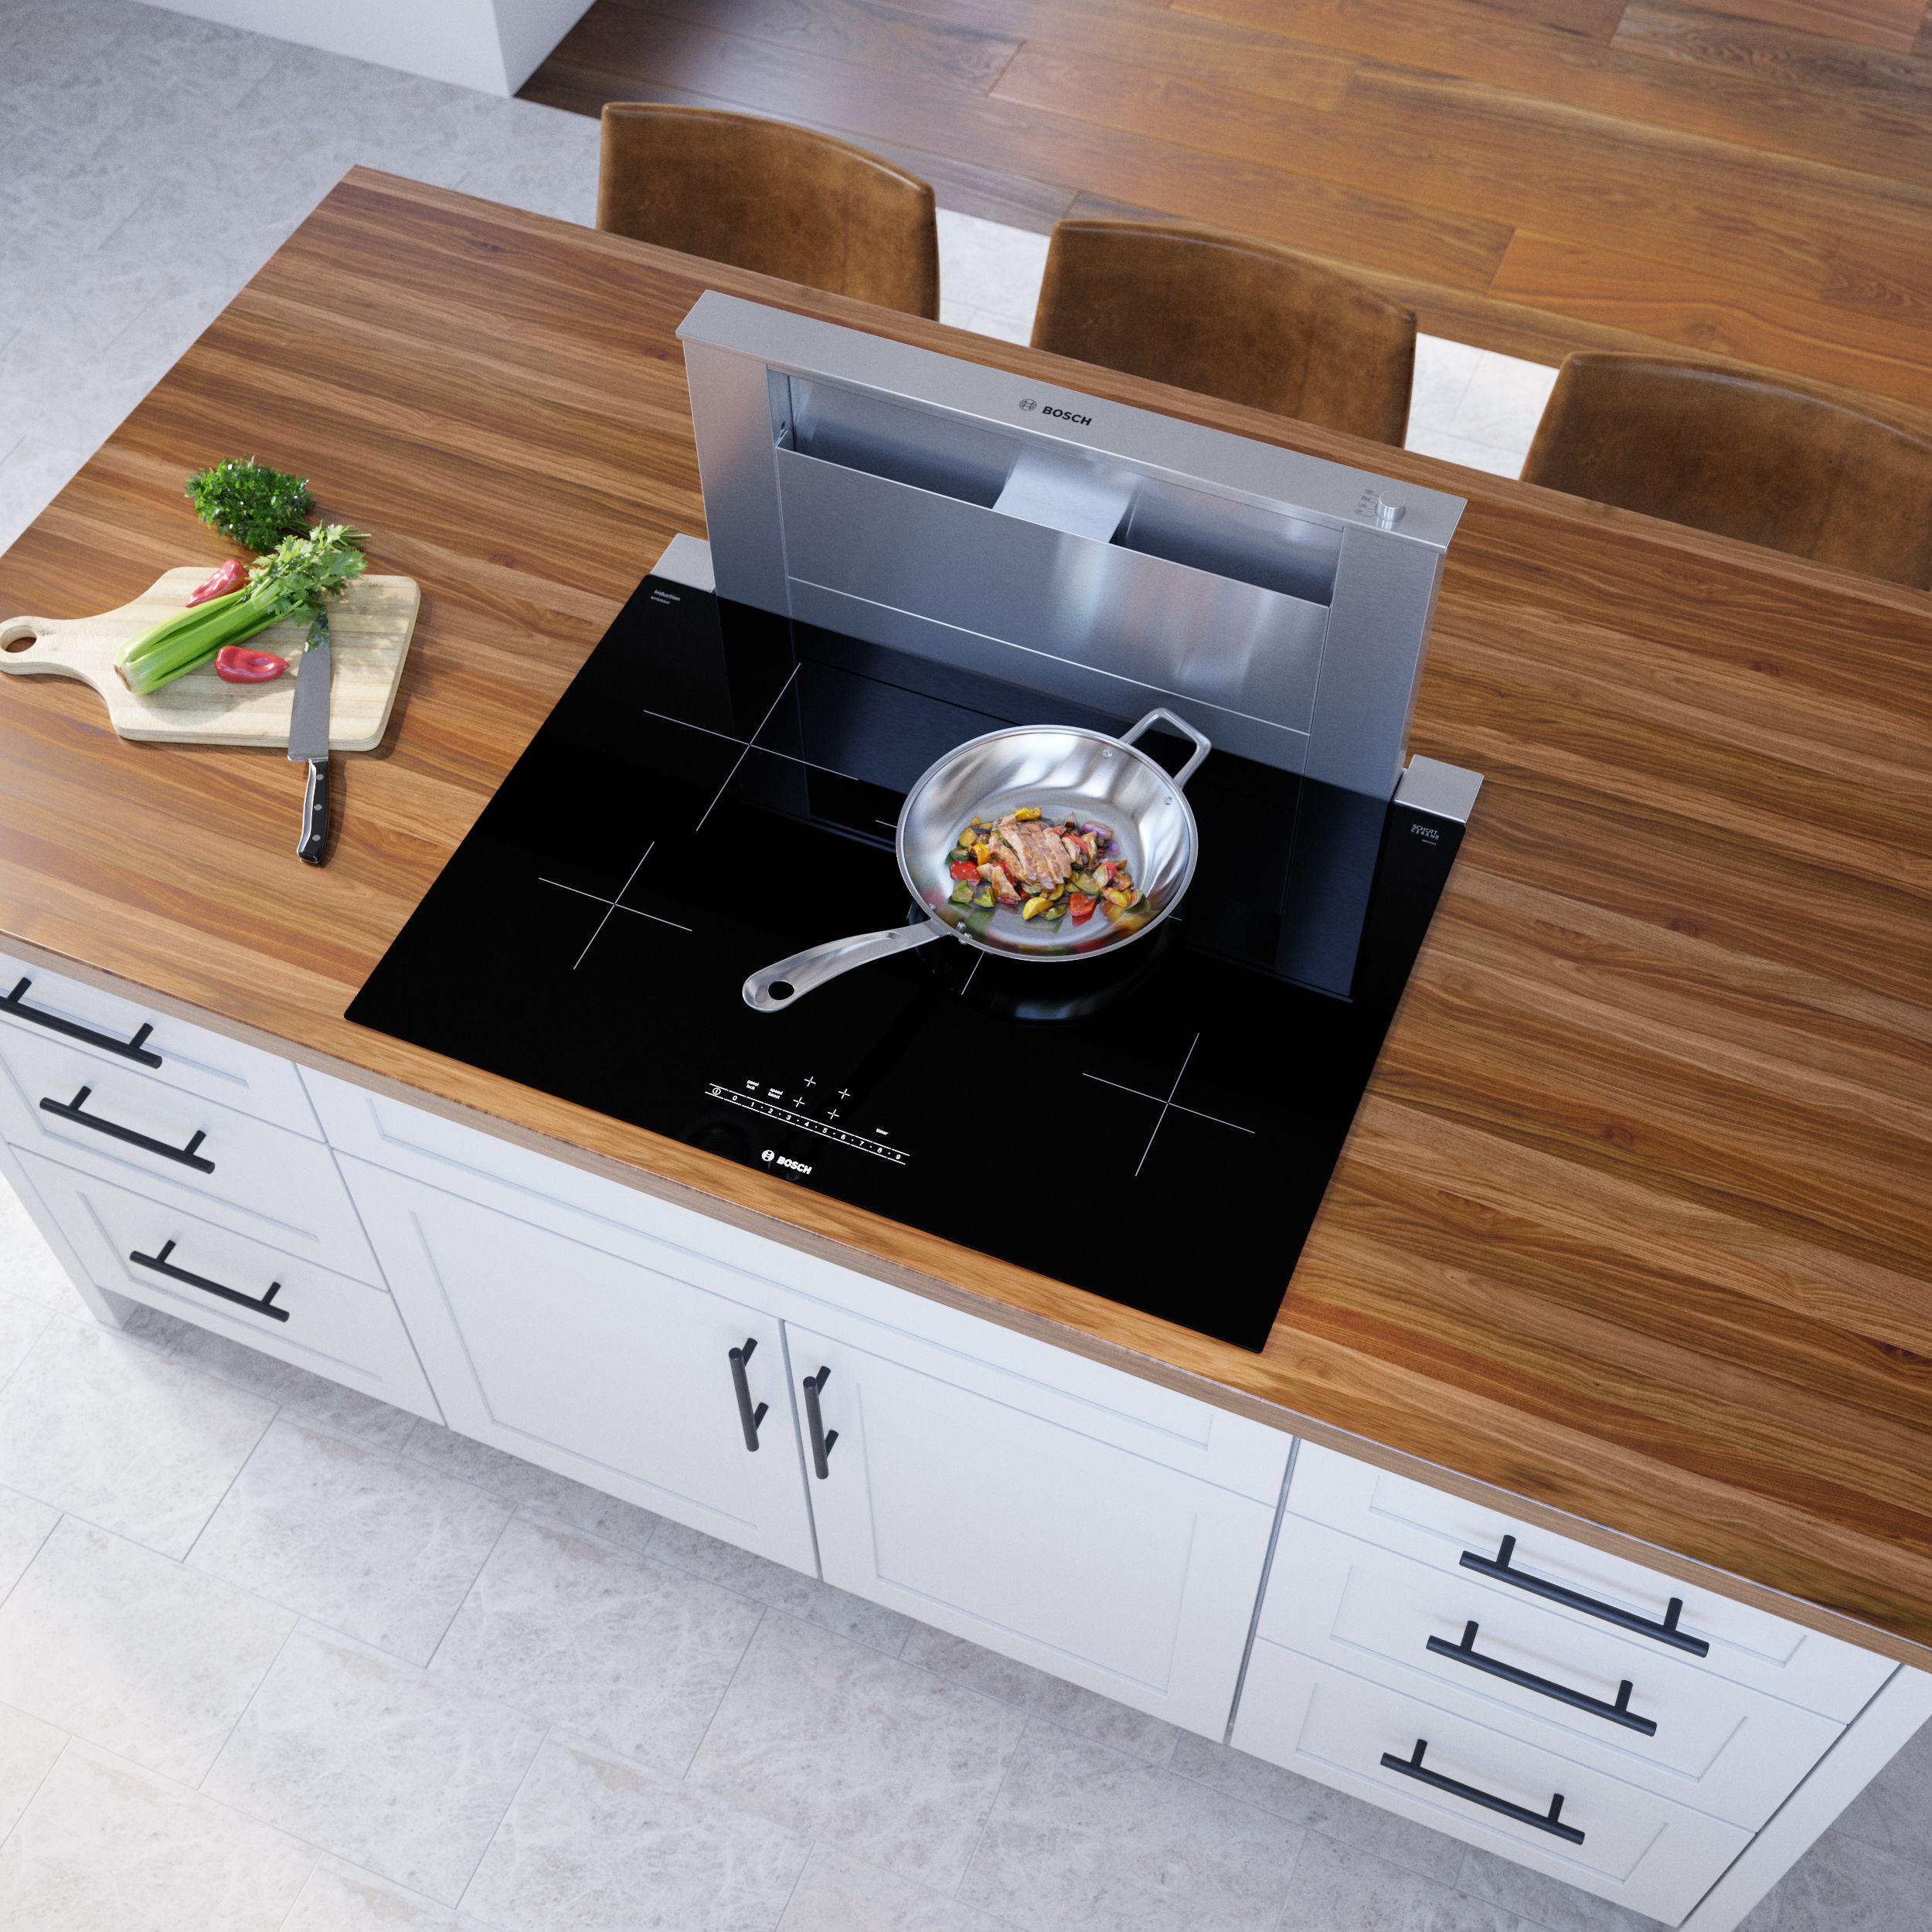 Bosch Induction Cooktop: Worth the Price?, Friedmans Appliance, Bay Area